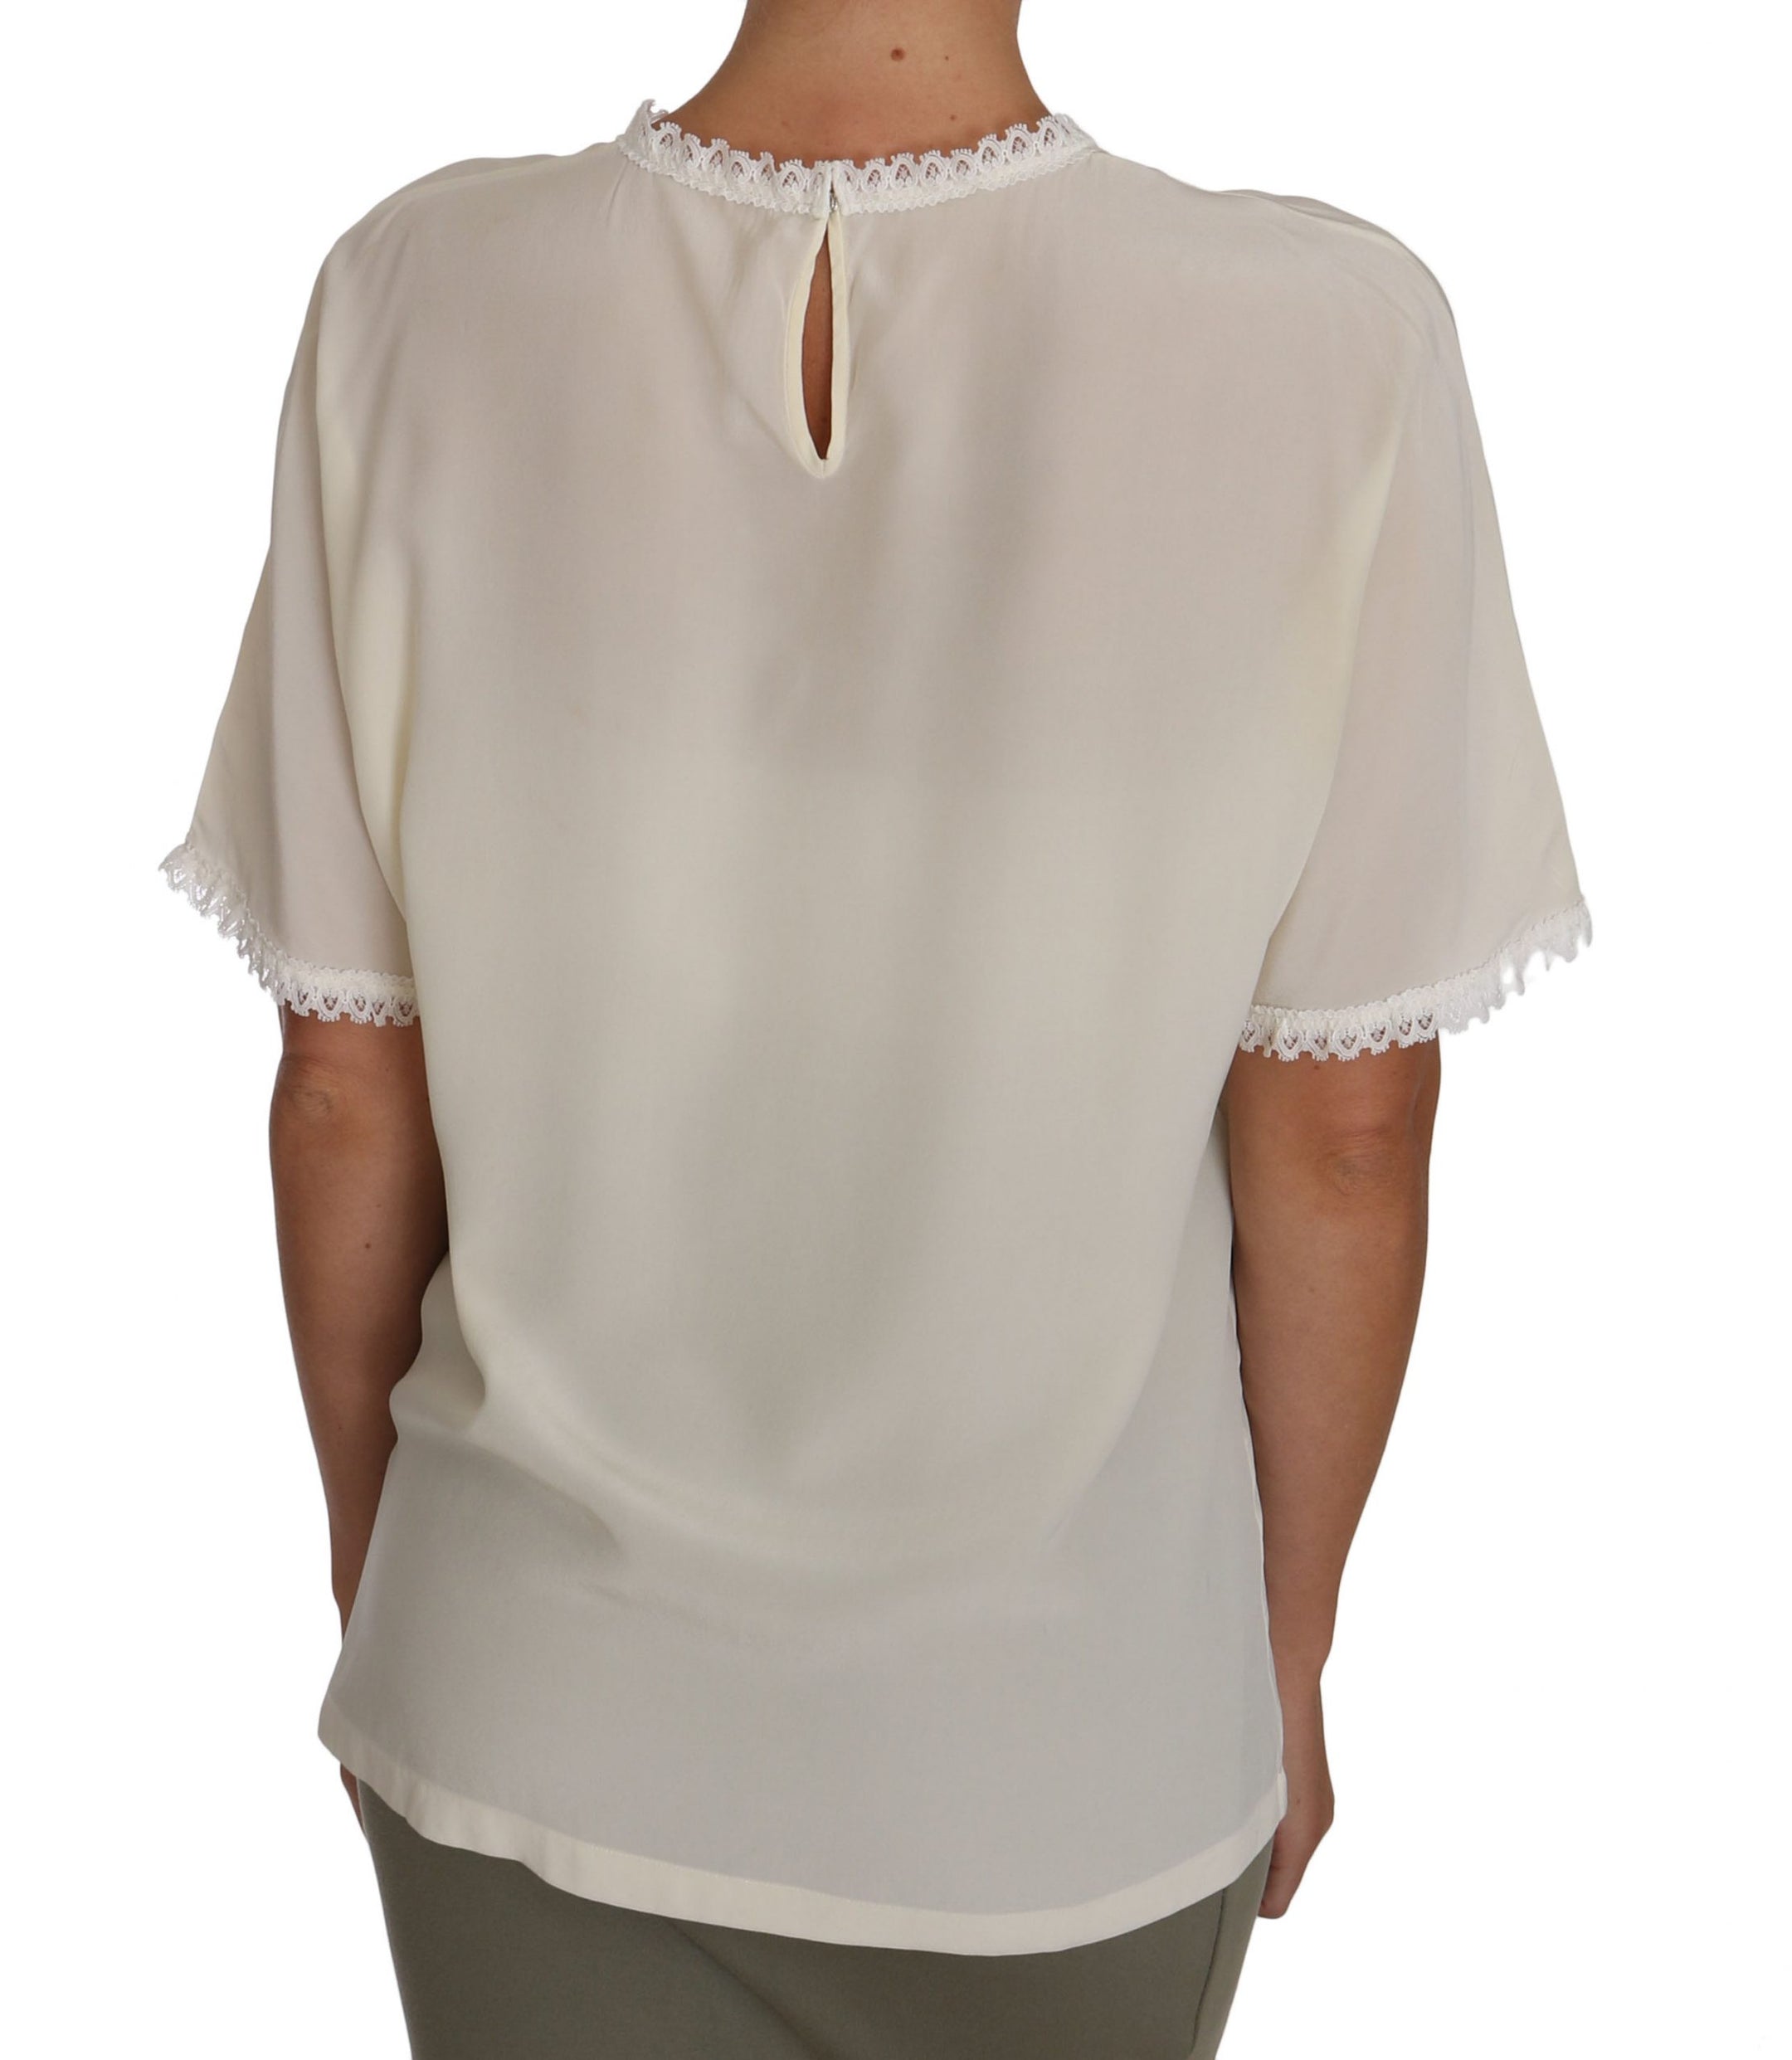 Buy White Cream Silk Lace Top Blouse T-Shirt by Dolce & Gabbana